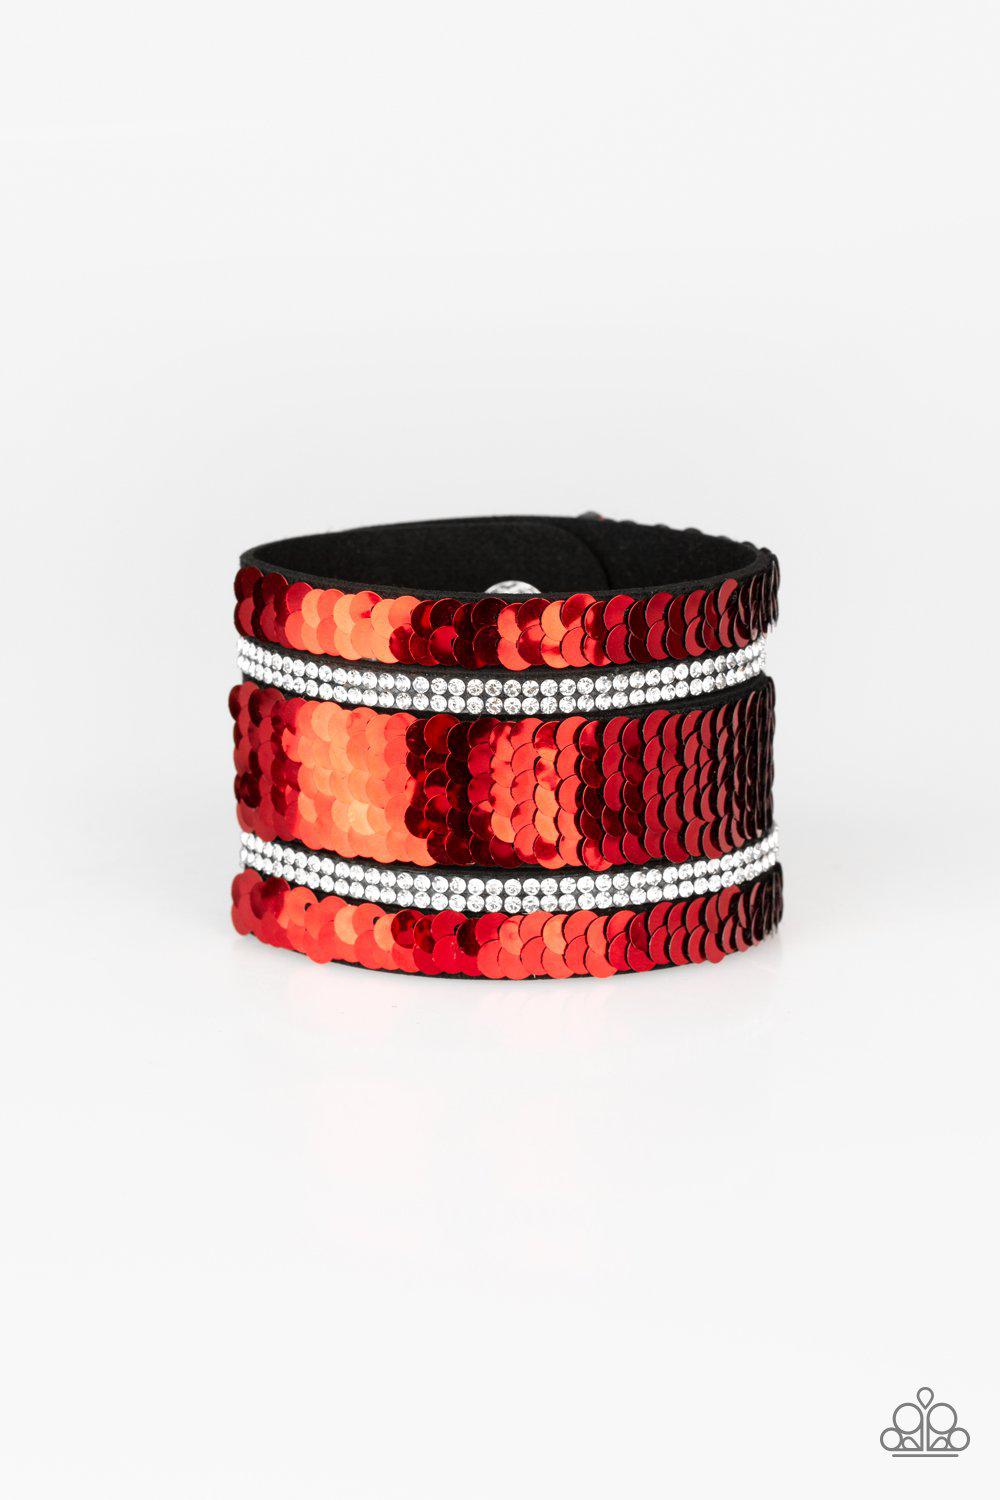 MERMAID Service Red and Silver Reversible Sequin Wrap Snap Bracelet - Paparazzi Accessories-CarasShop.com - $5 Jewelry by Cara Jewels